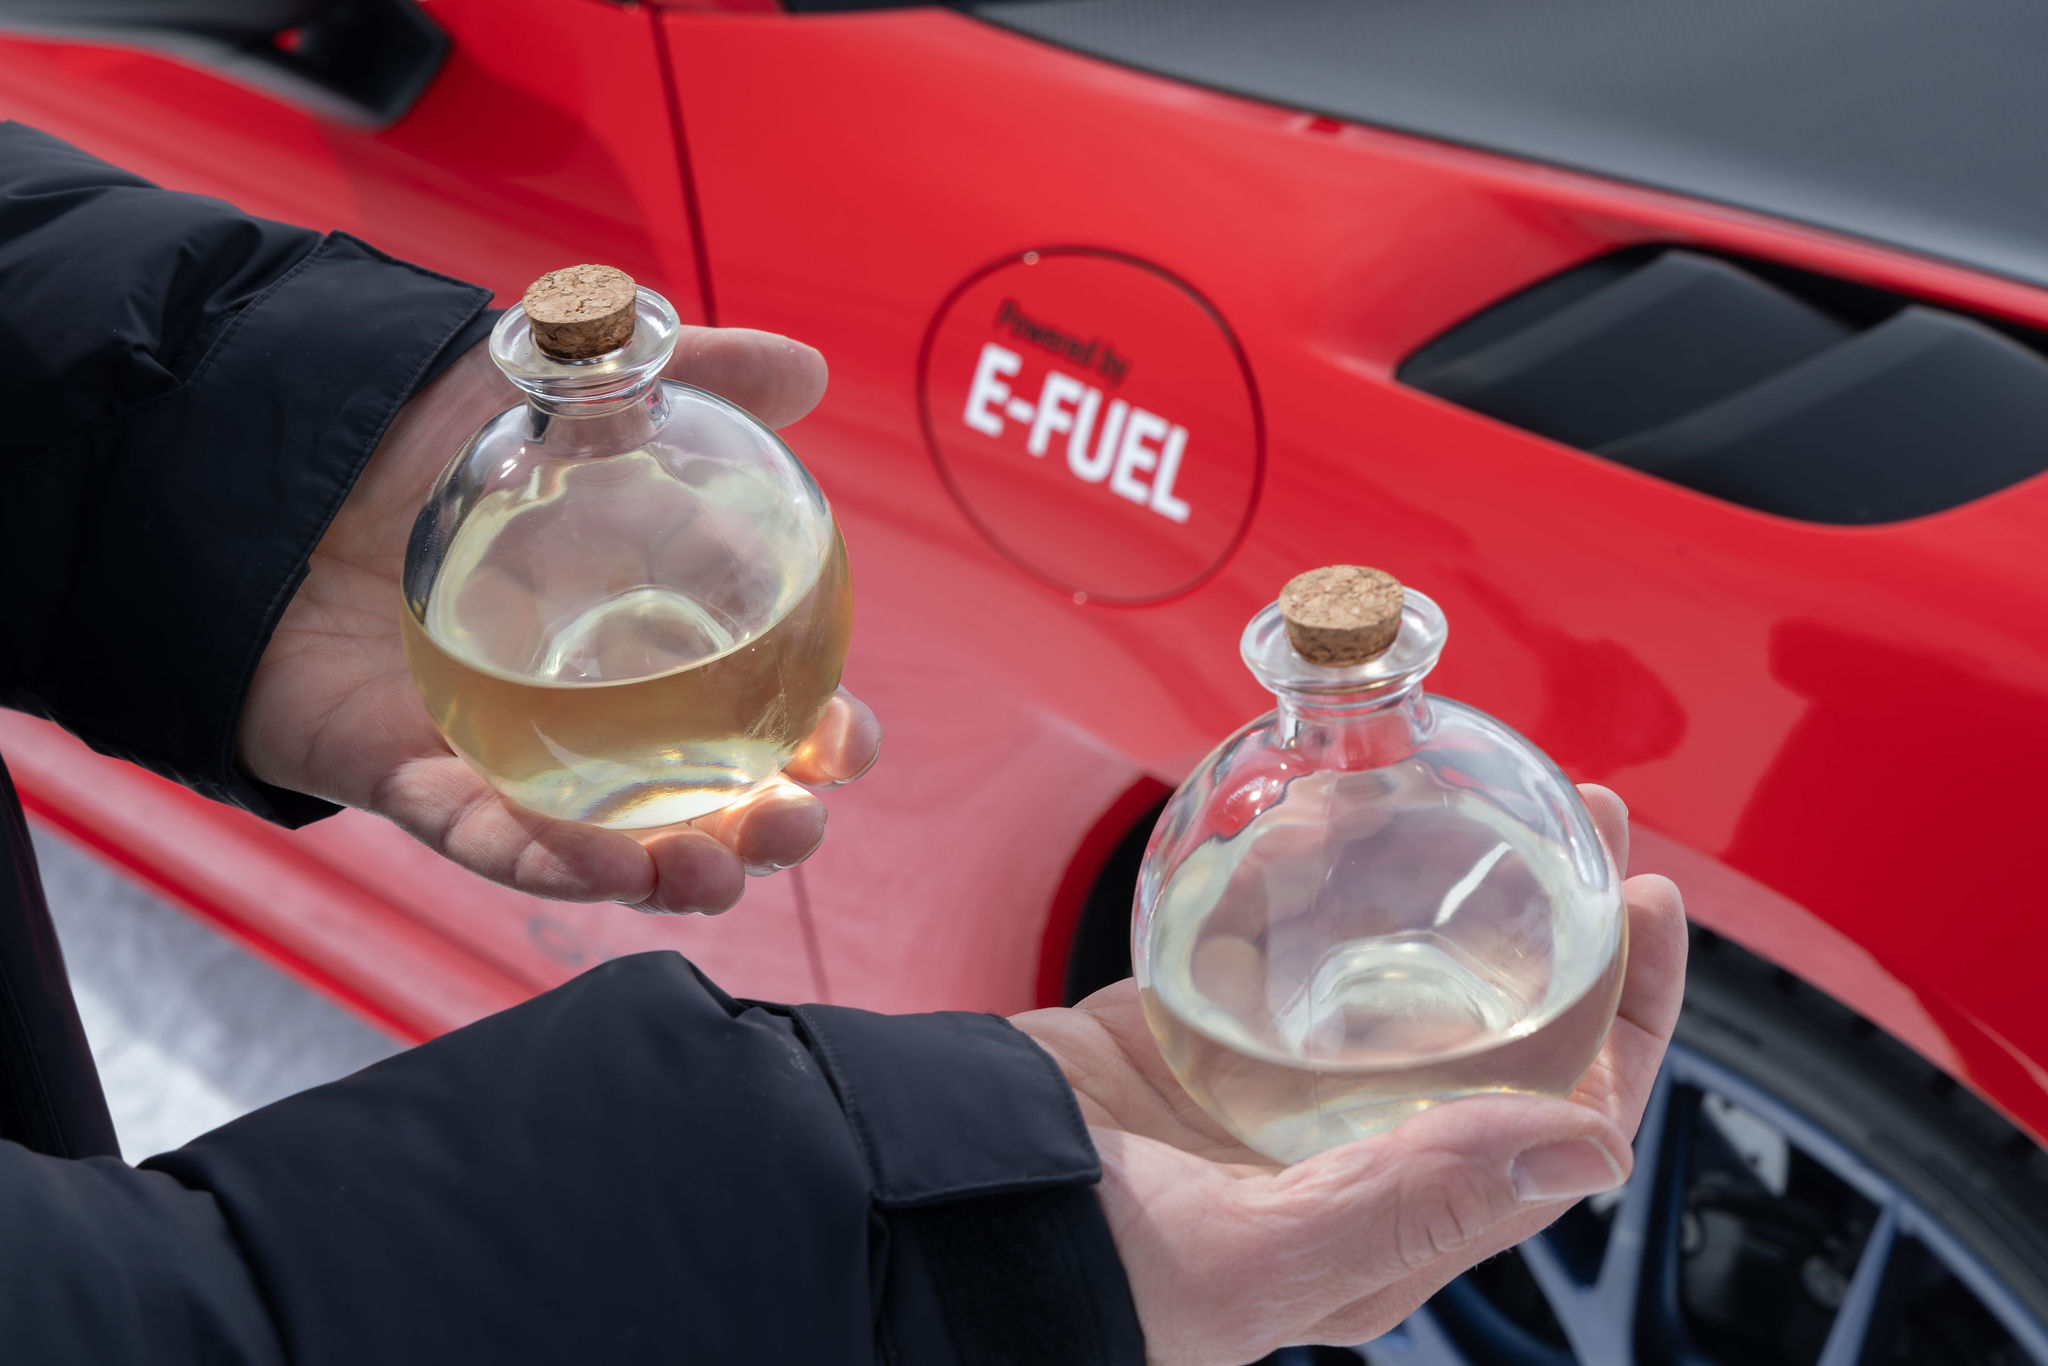 On the left, unleaded 98, on the right, e-fuel // Source: Tibo for Porsche France / Frandroid